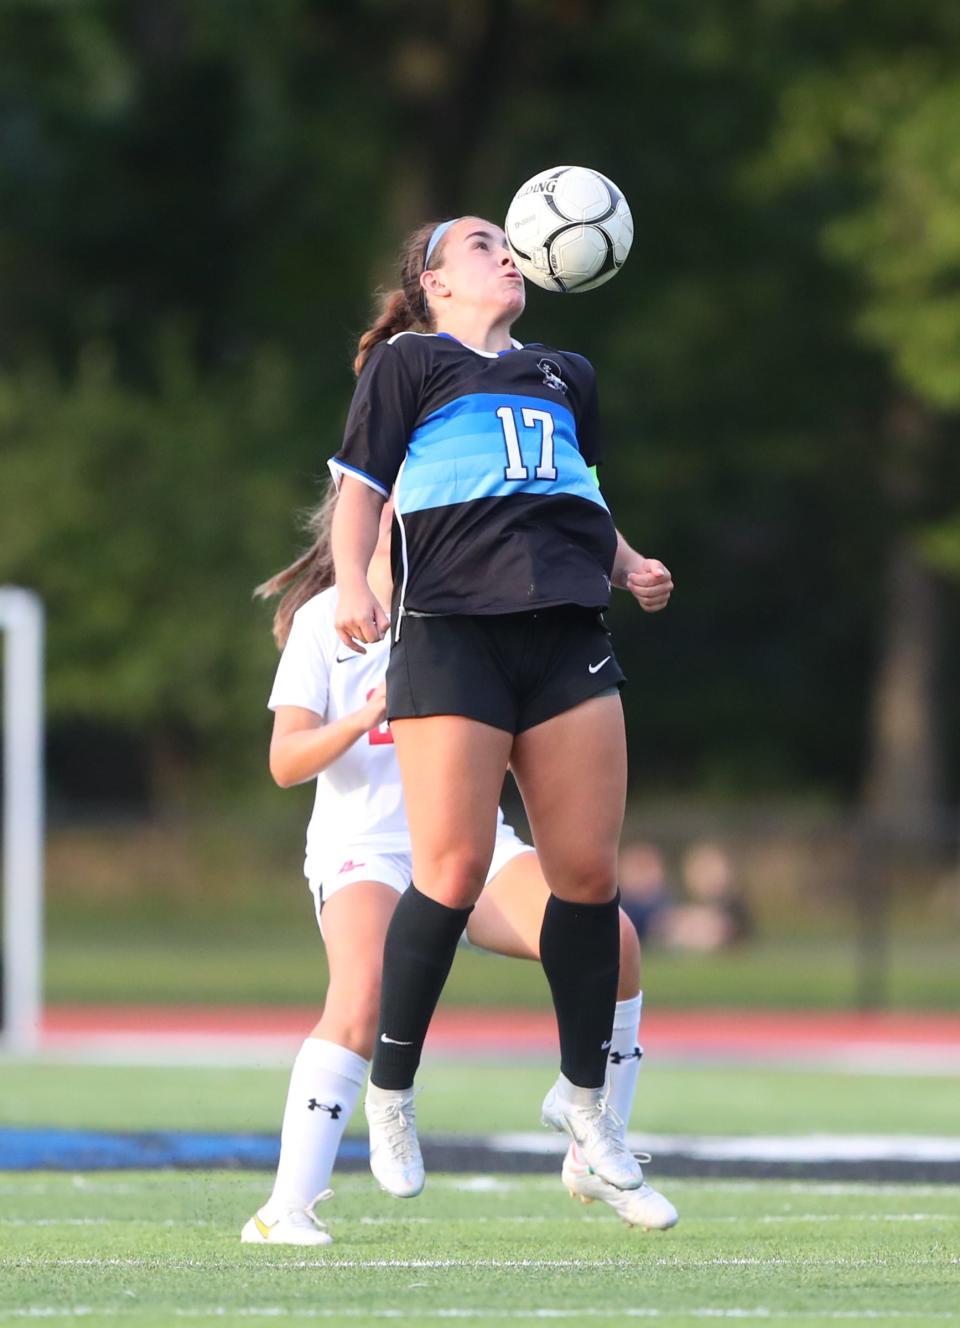 Pearl River's Marissa Graziano (17) was a league player of the year, Elite 12 and all-section selection.